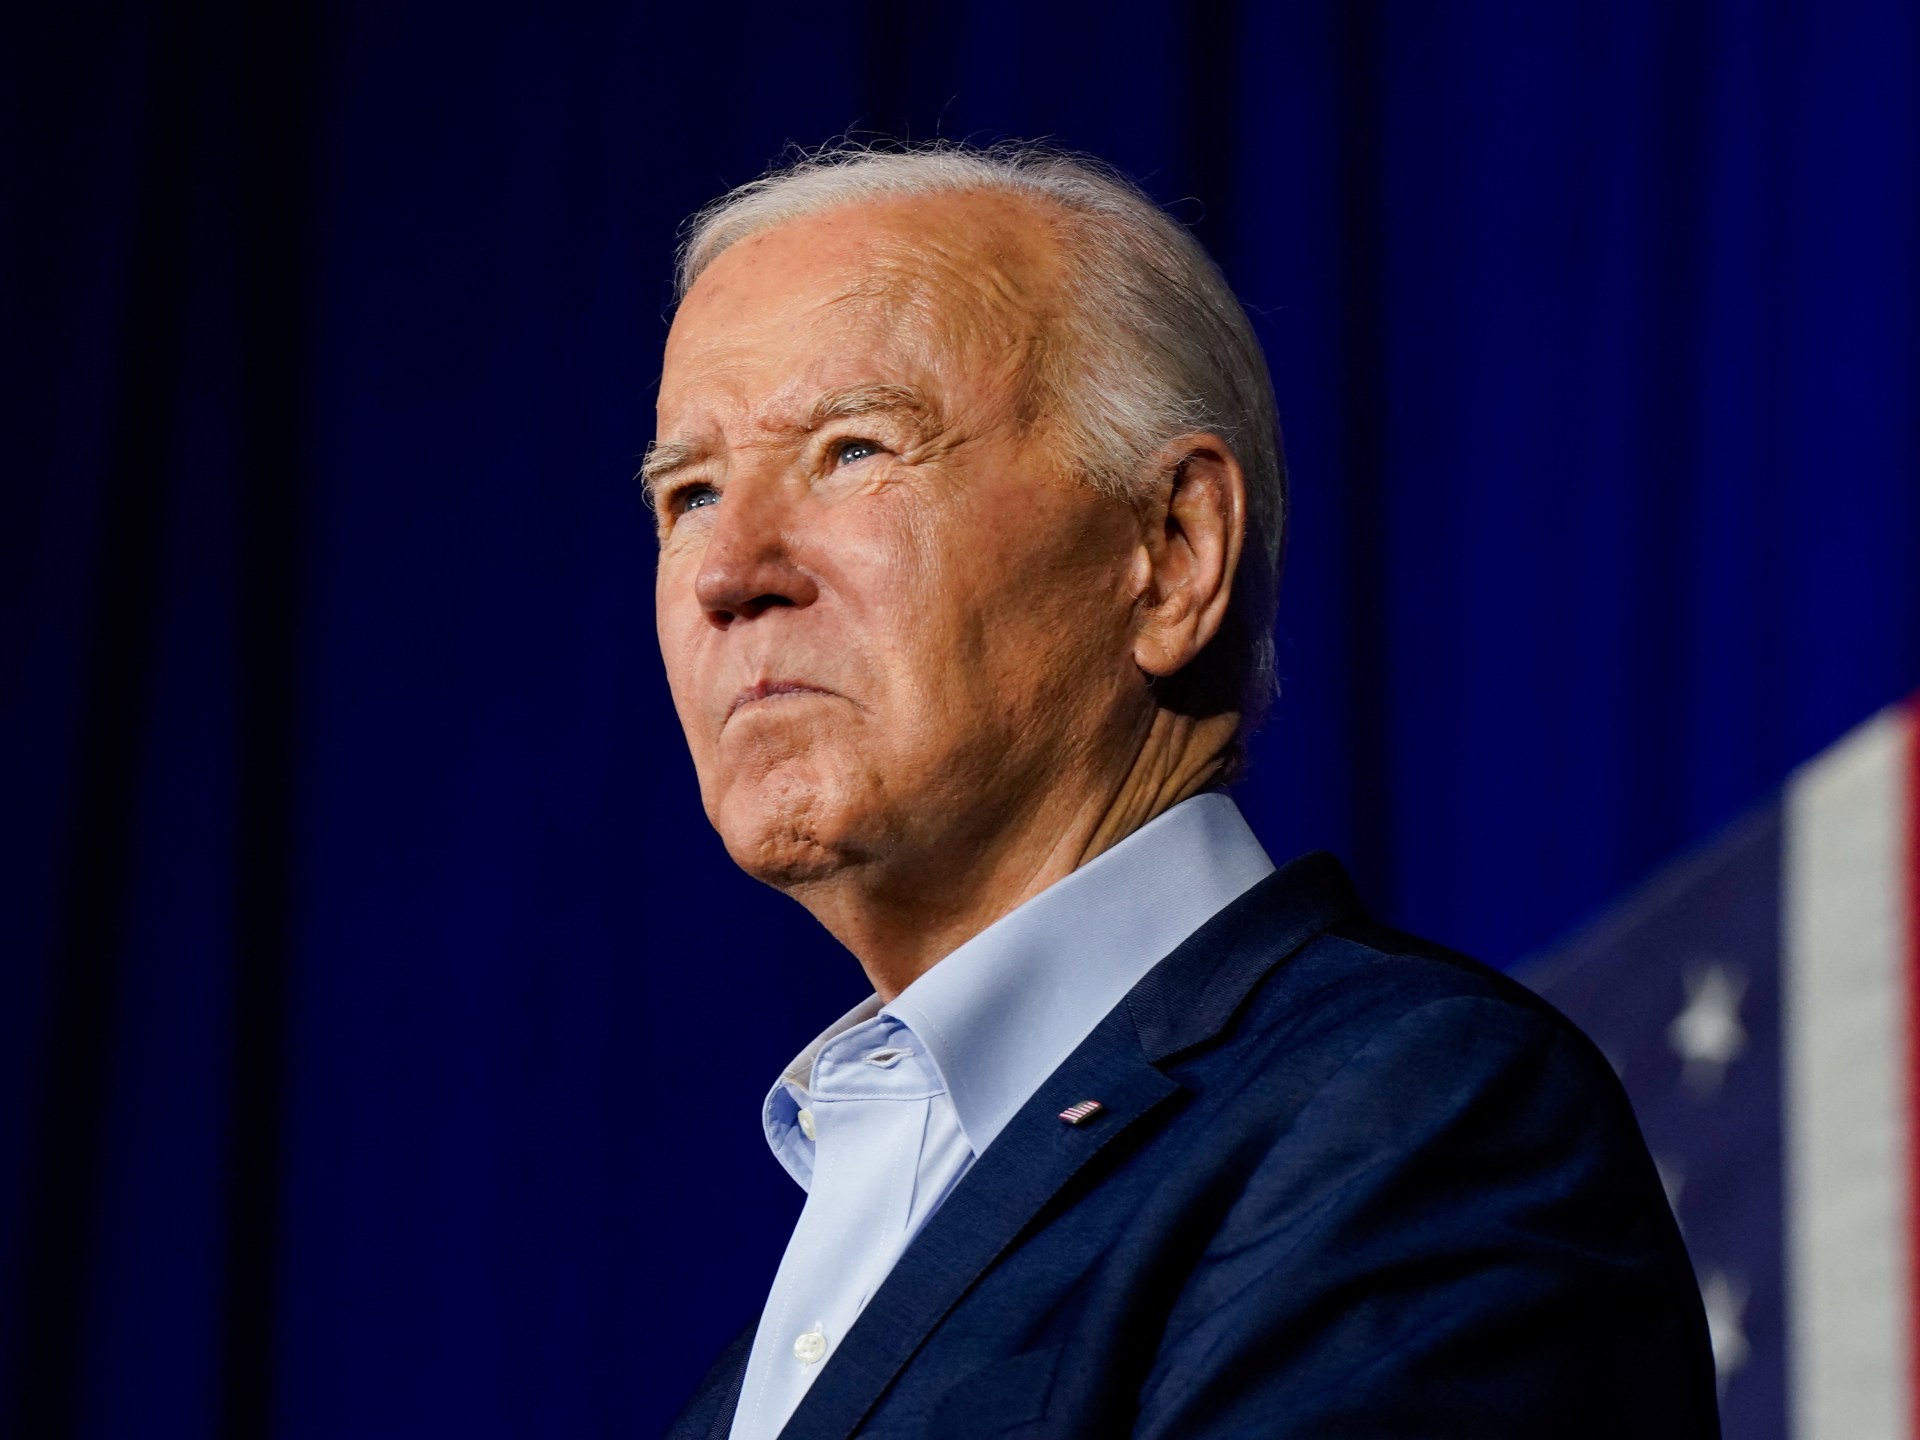 Biden urges Congress to end impasse and send aid to Israel and Ukraine | Politics News [Video]